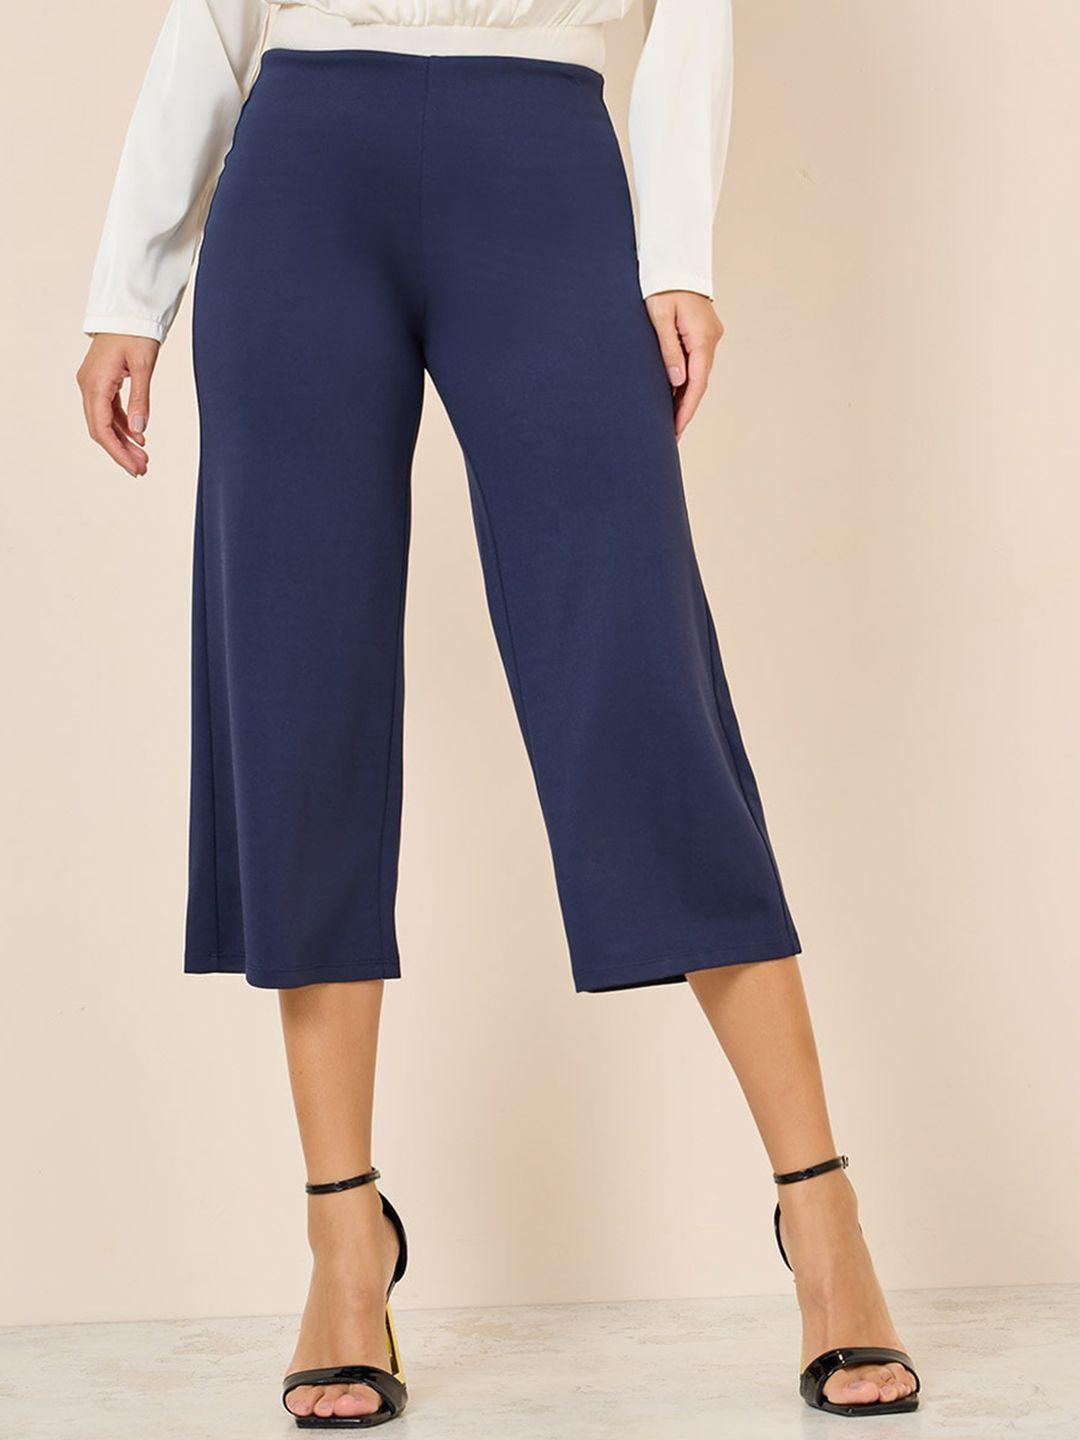 styli women navy blue flared high-rise culottes trousers